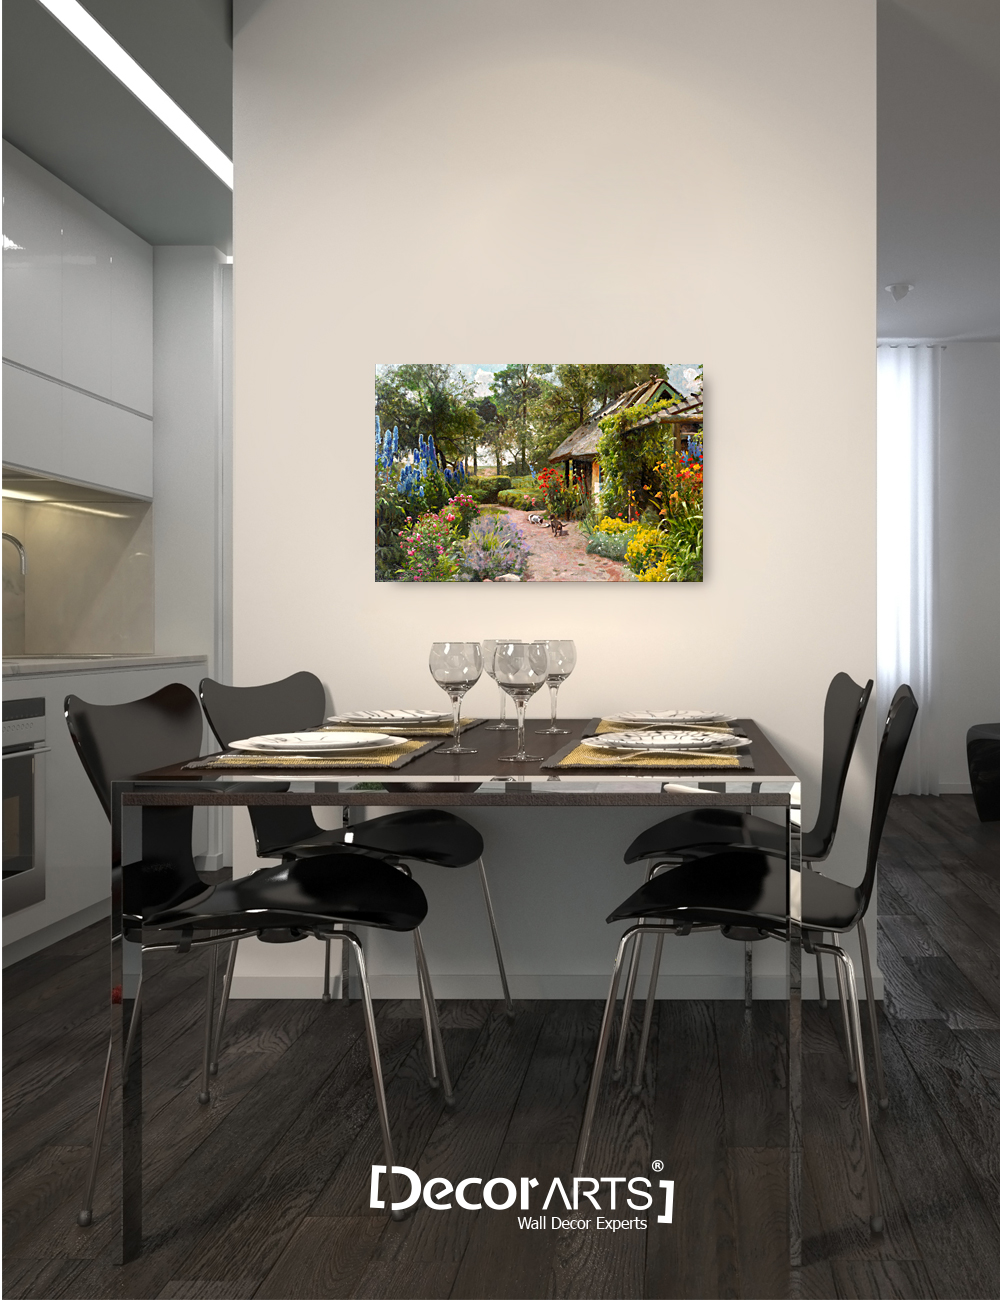 DECORARTS Meal Times by Peder Mork Monsted. Giclee Print on Canvas Art  for Home Decor, 24x16